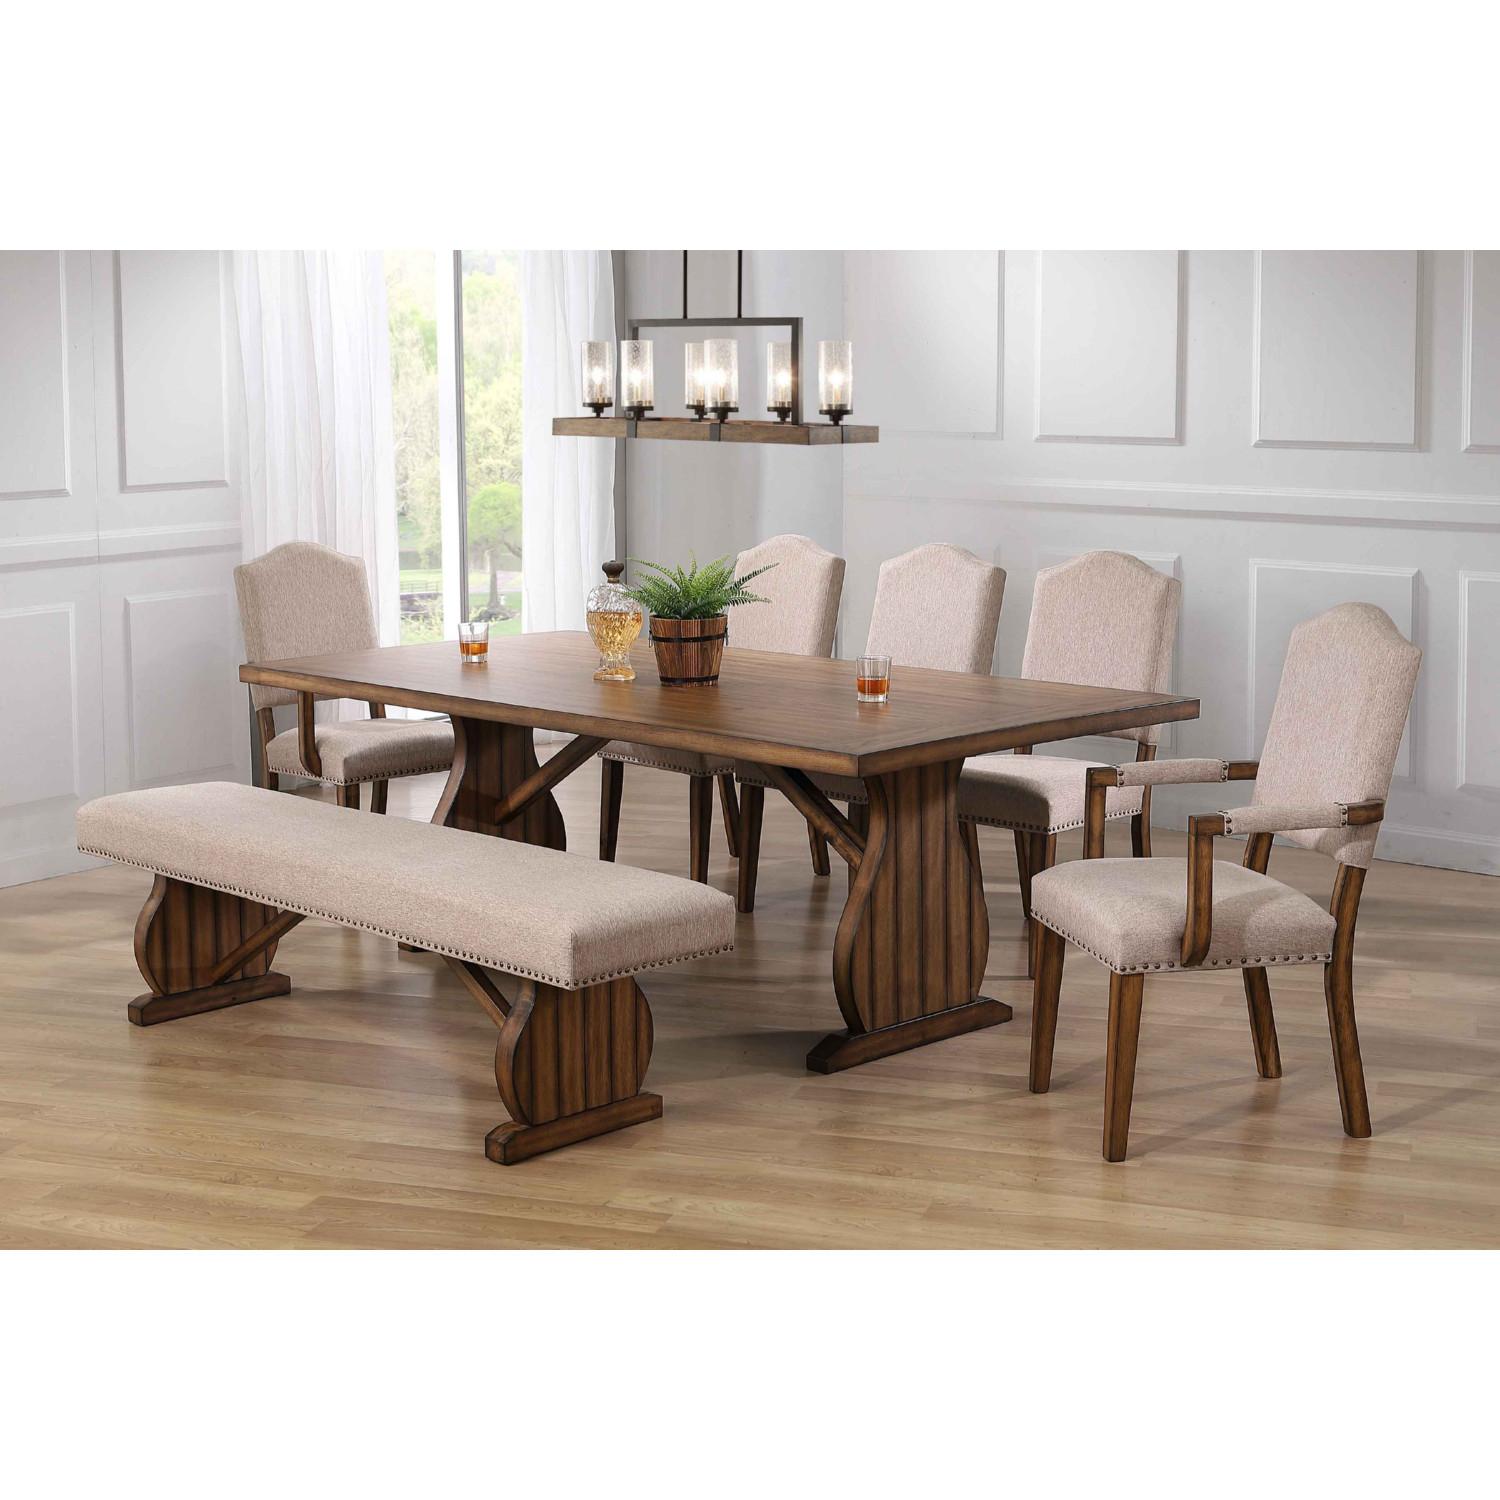 Traditional Dining Room Set Maurice 62470-9pcs in Brown Oak 